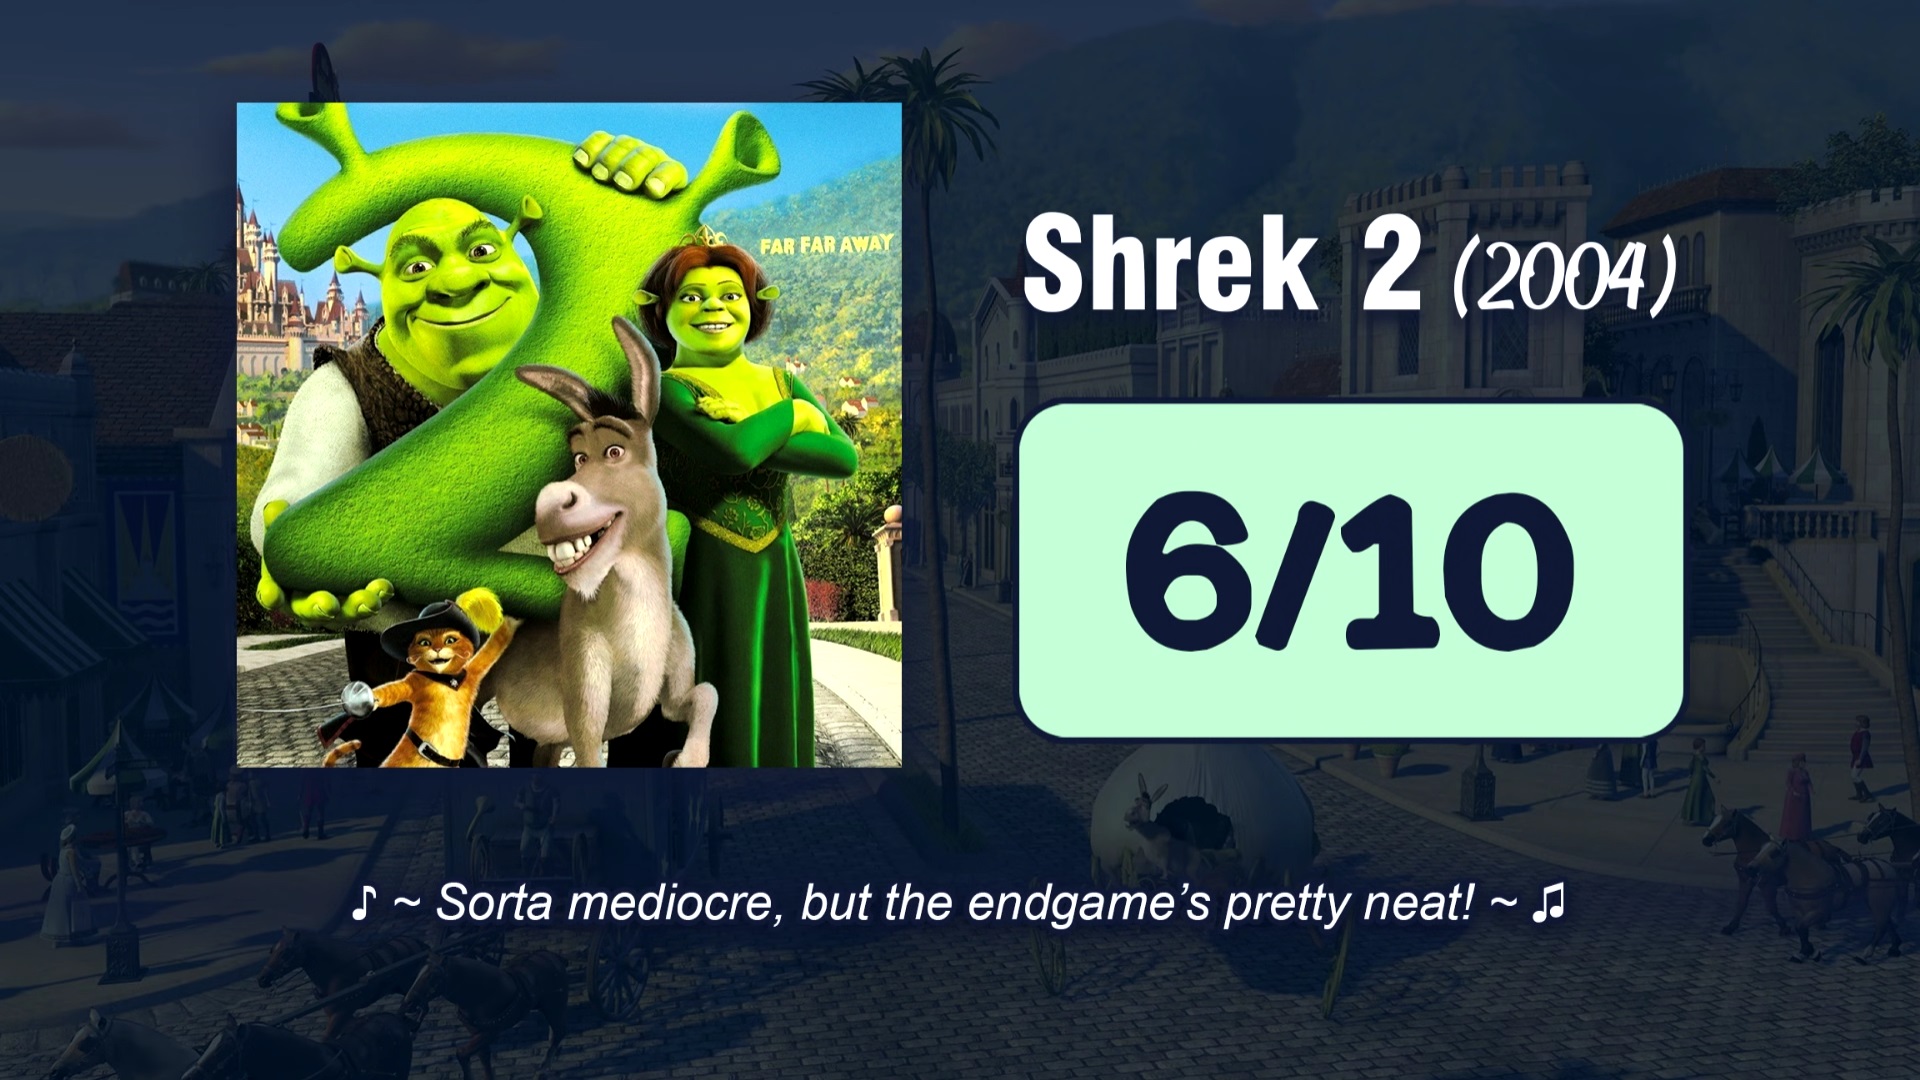 Guy Reviews All Dreamworks Animation Films In 10 Words Or Less — GeekTyrant